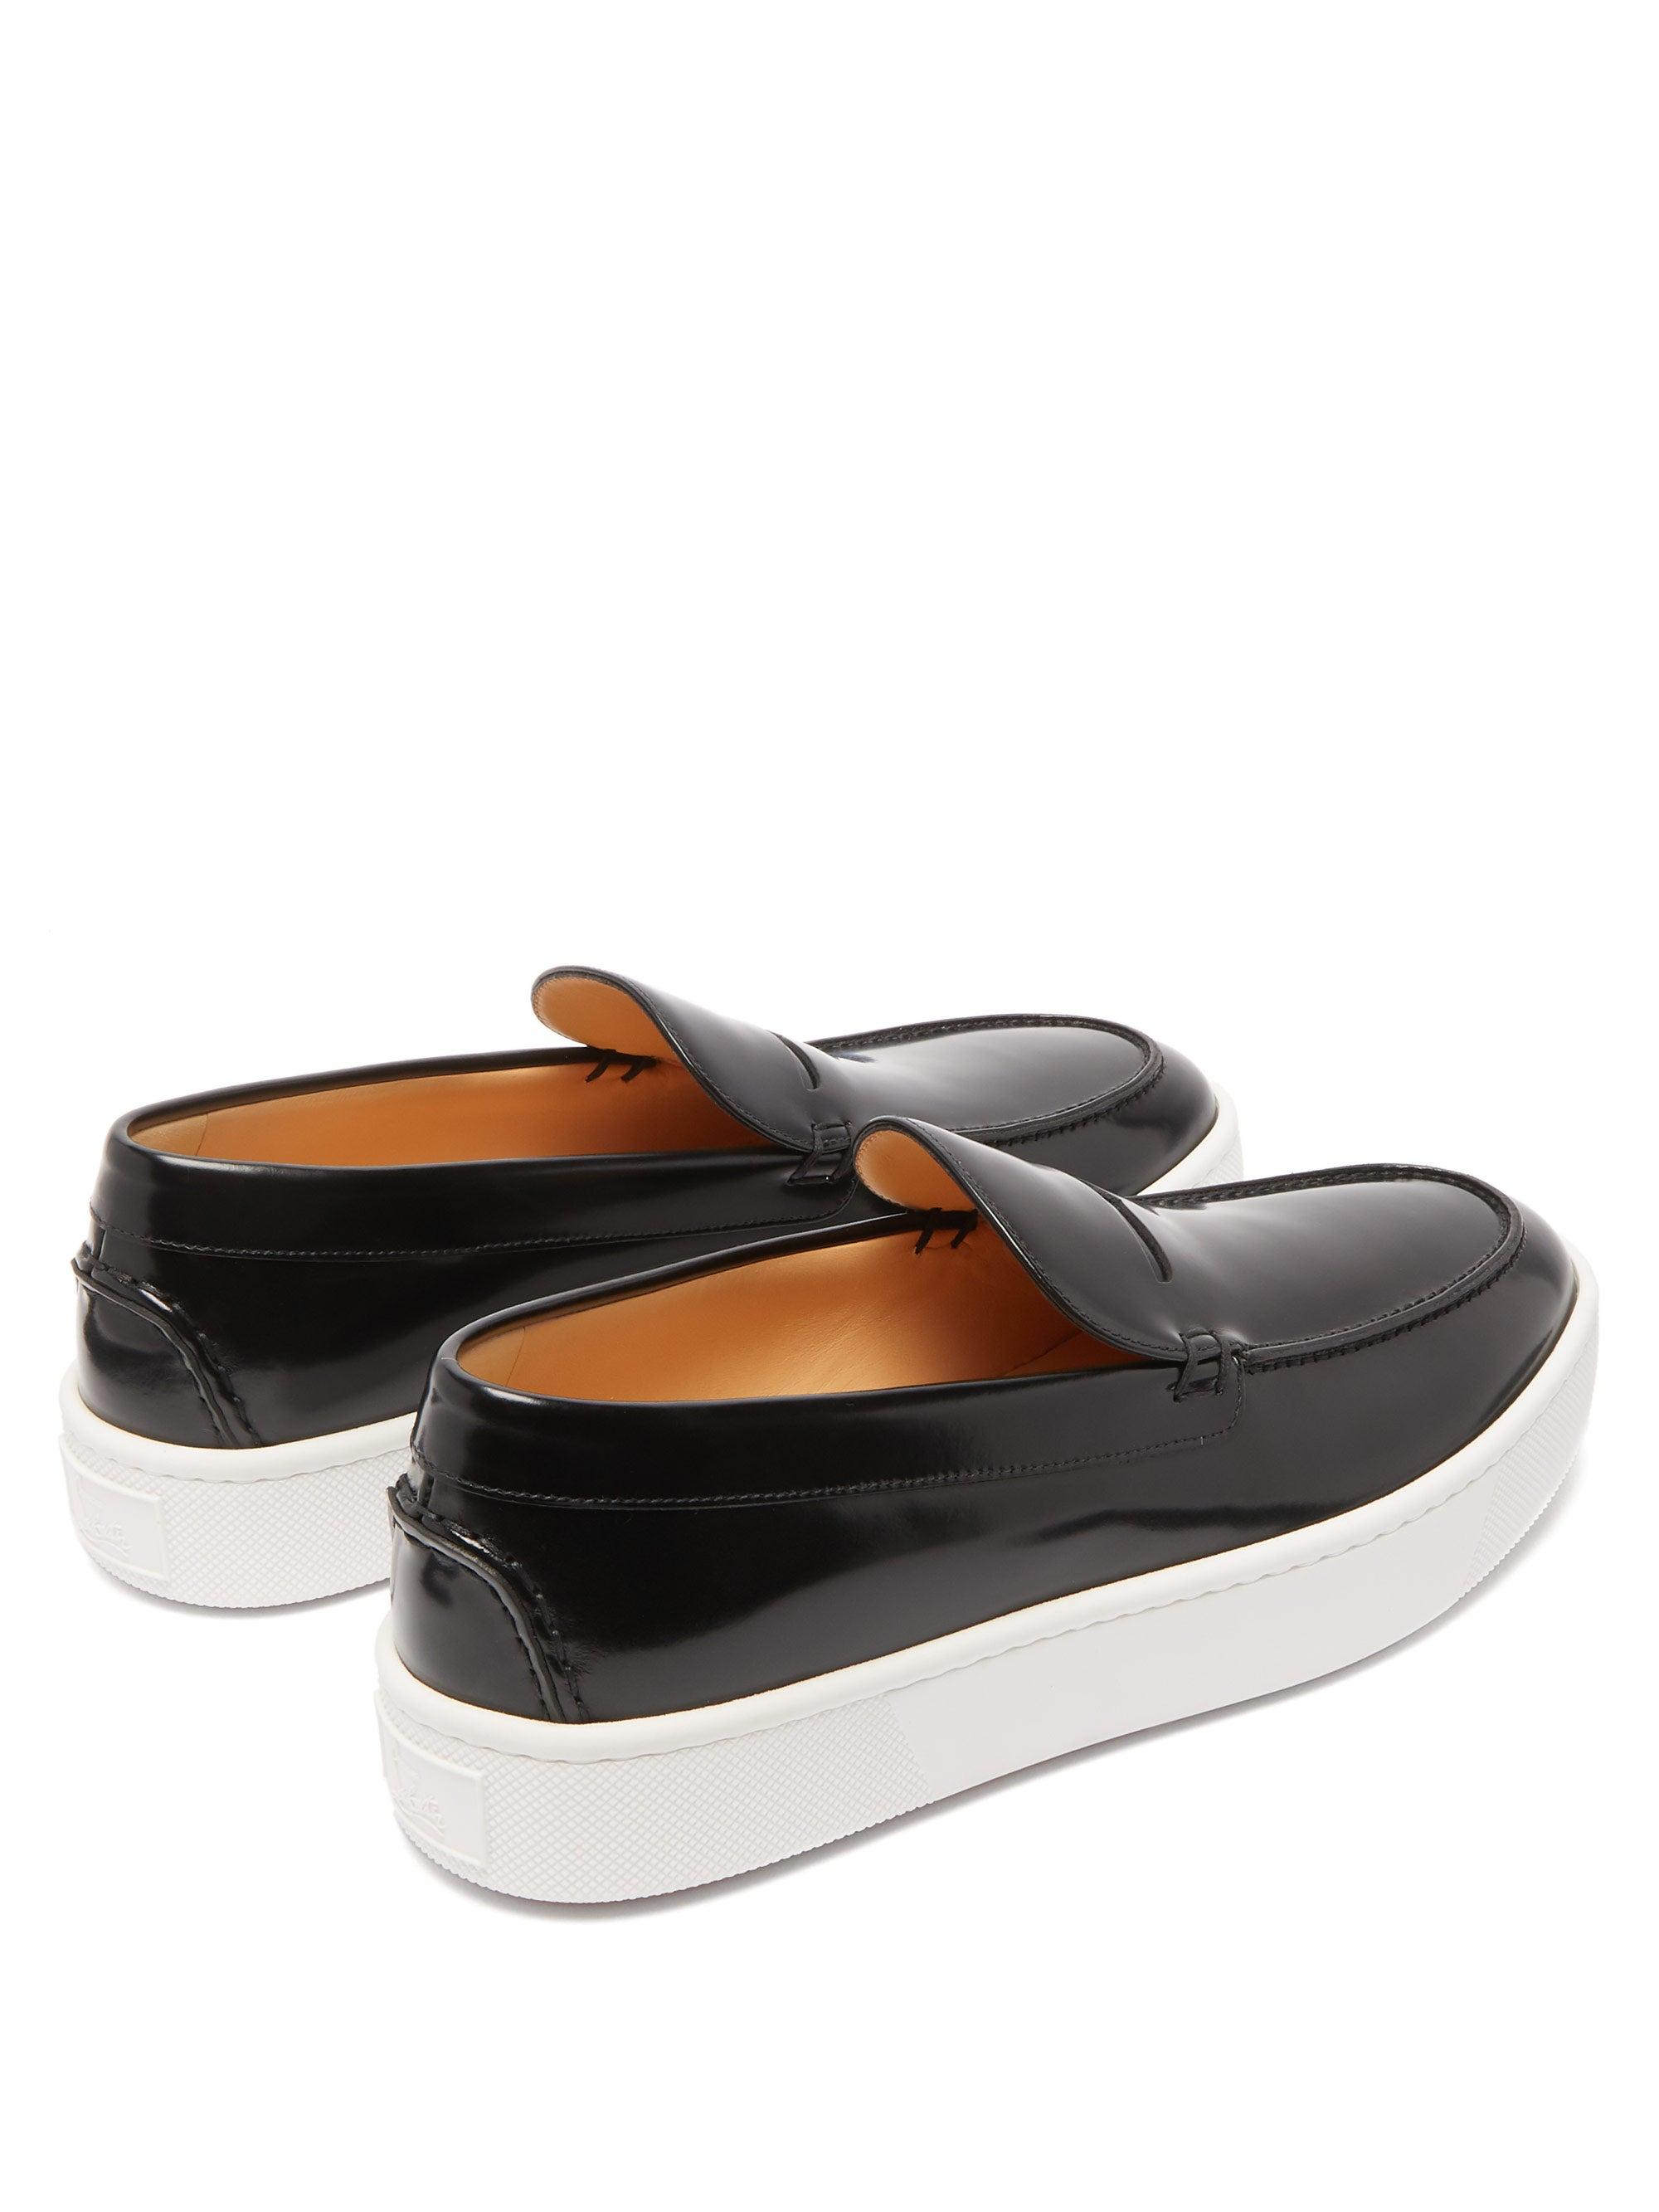 Christian Louboutin Paqueboat Leather Deck Shoes in Black for Men 